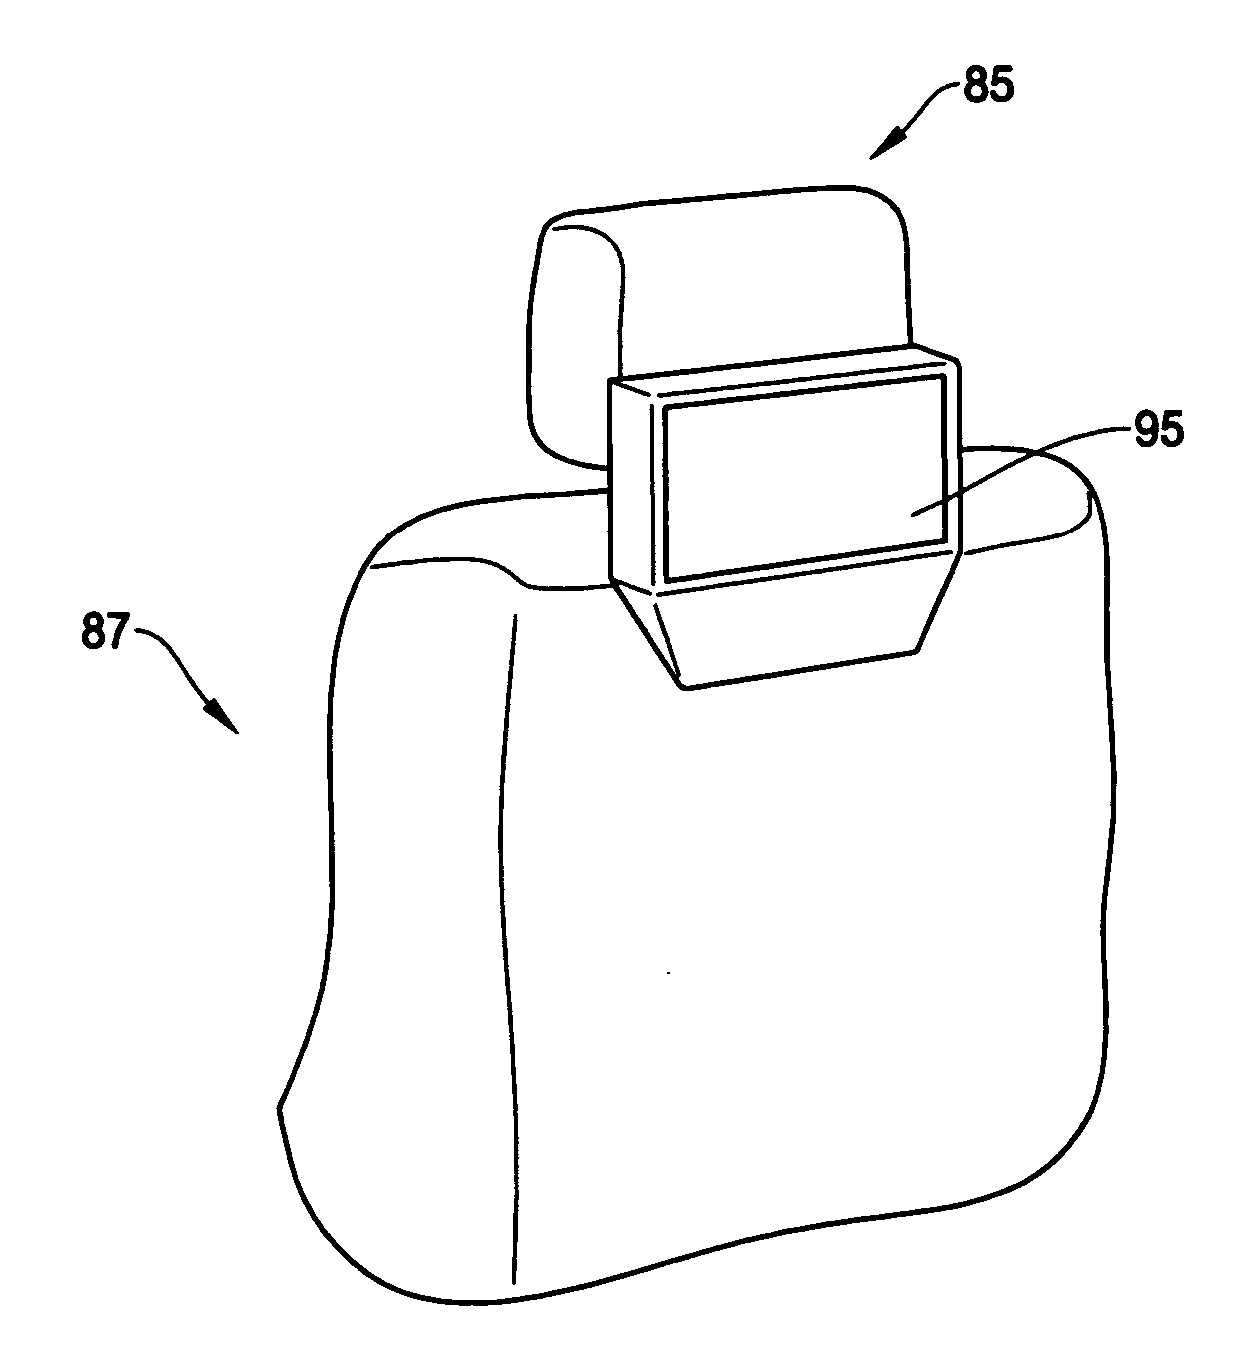 Method and apparatus for mounting rear seat entertainment device